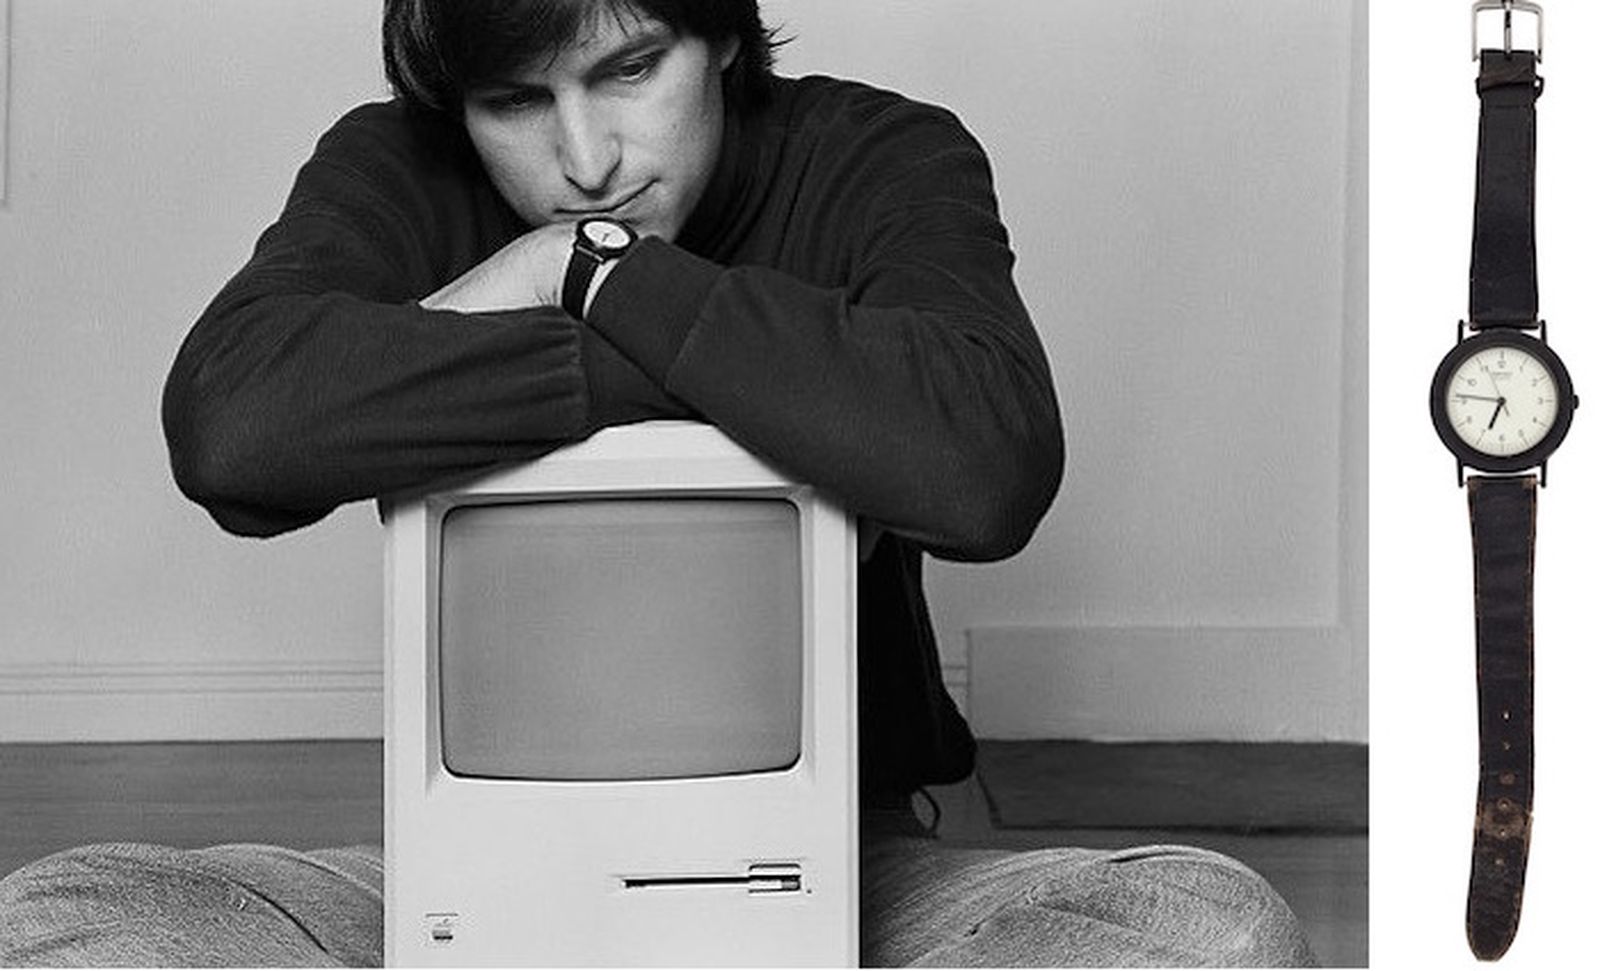 Steve Jobs' 1984 Seiko Wristwatch Sold for $42,500 at Auction - MacRumors